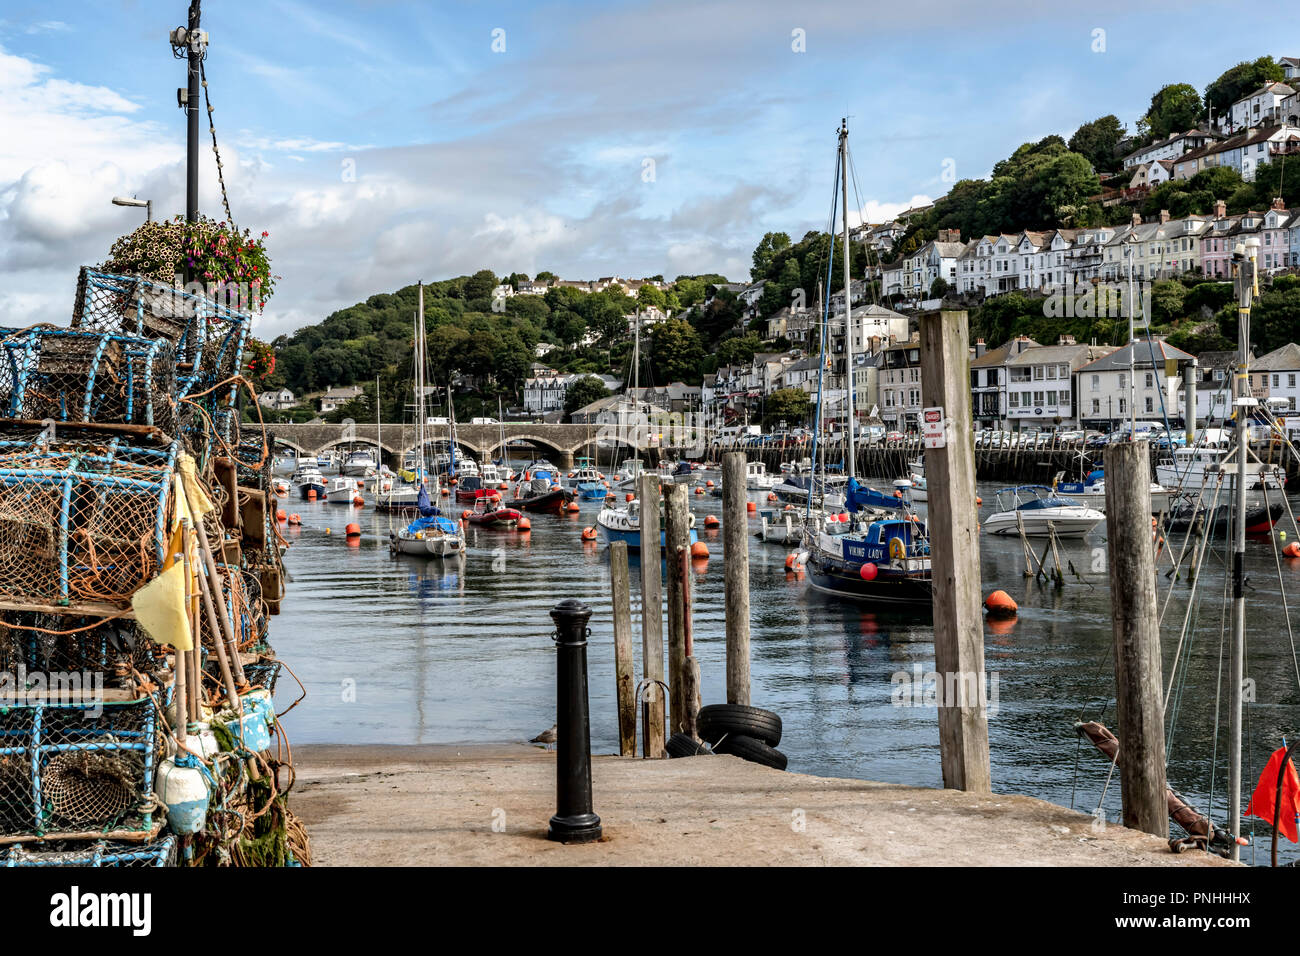 LOOE, Cornwall, England, UK - September 10 2018: The town of Looe Estuary in high tide with fishing boats and Yachts. Looe a very popular fishing port Stock Photo